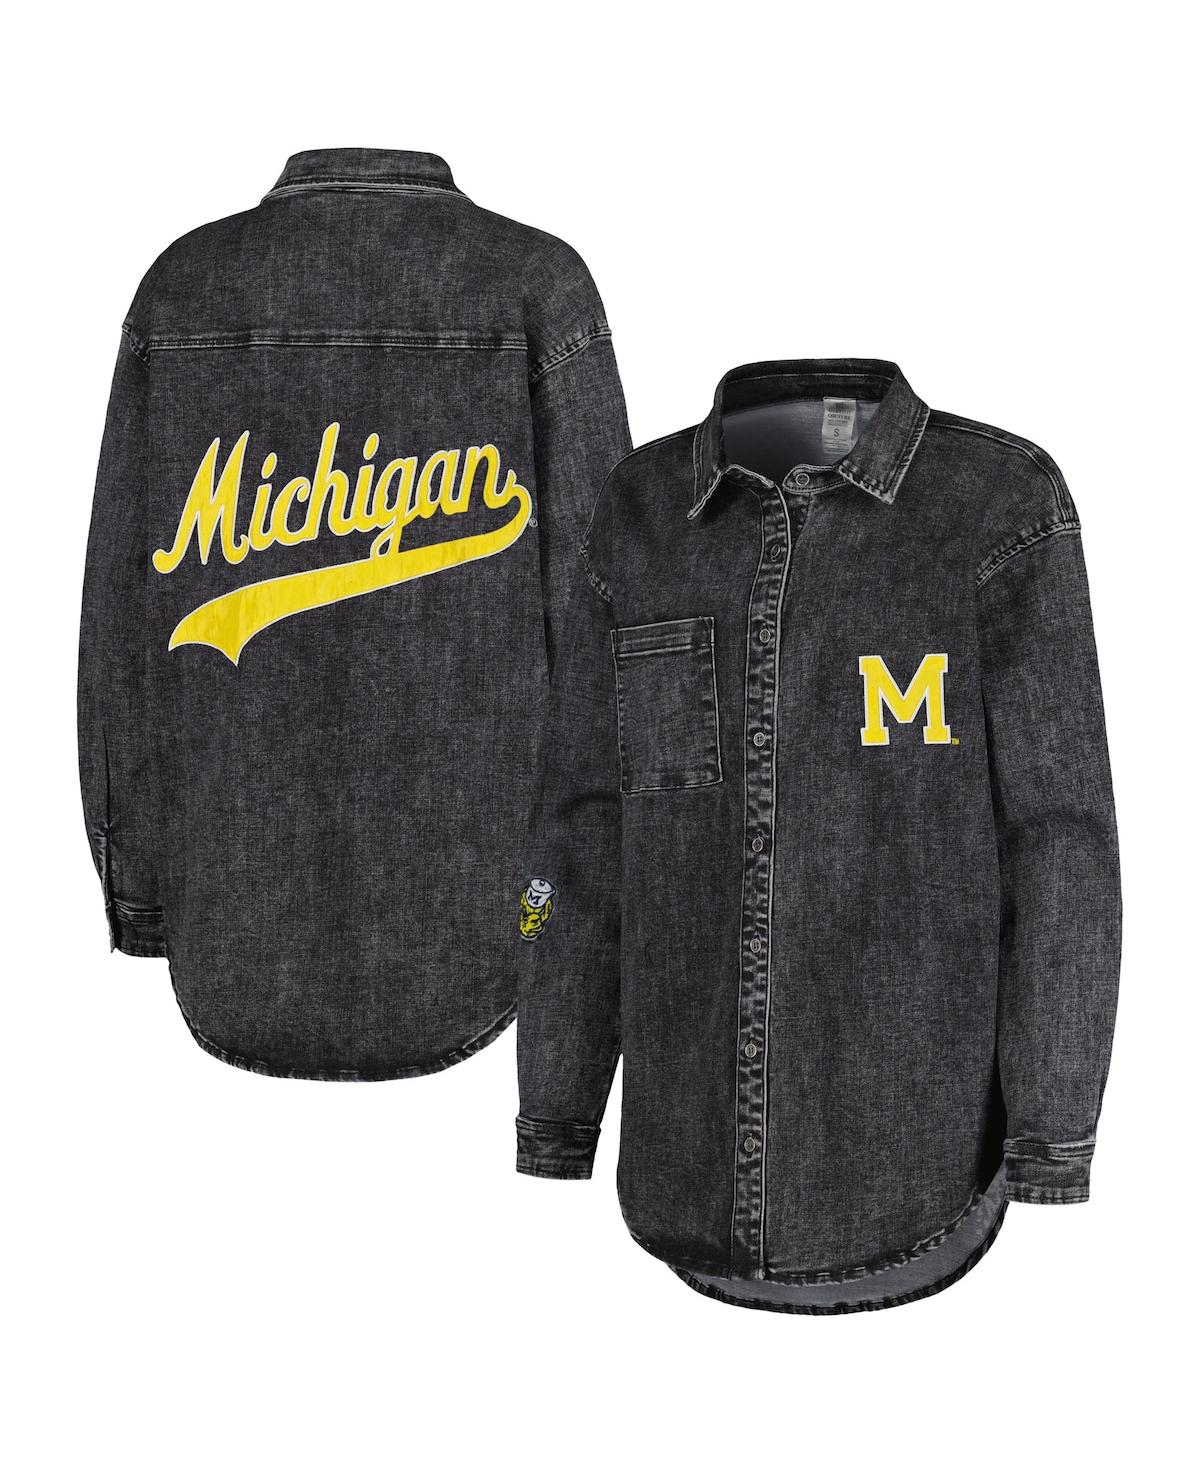 Women's Gameday Couture Charcoal Michigan Wolverines Multi-Hit Tri-Blend Oversized Button-Up Denim Jacket - Charcoal